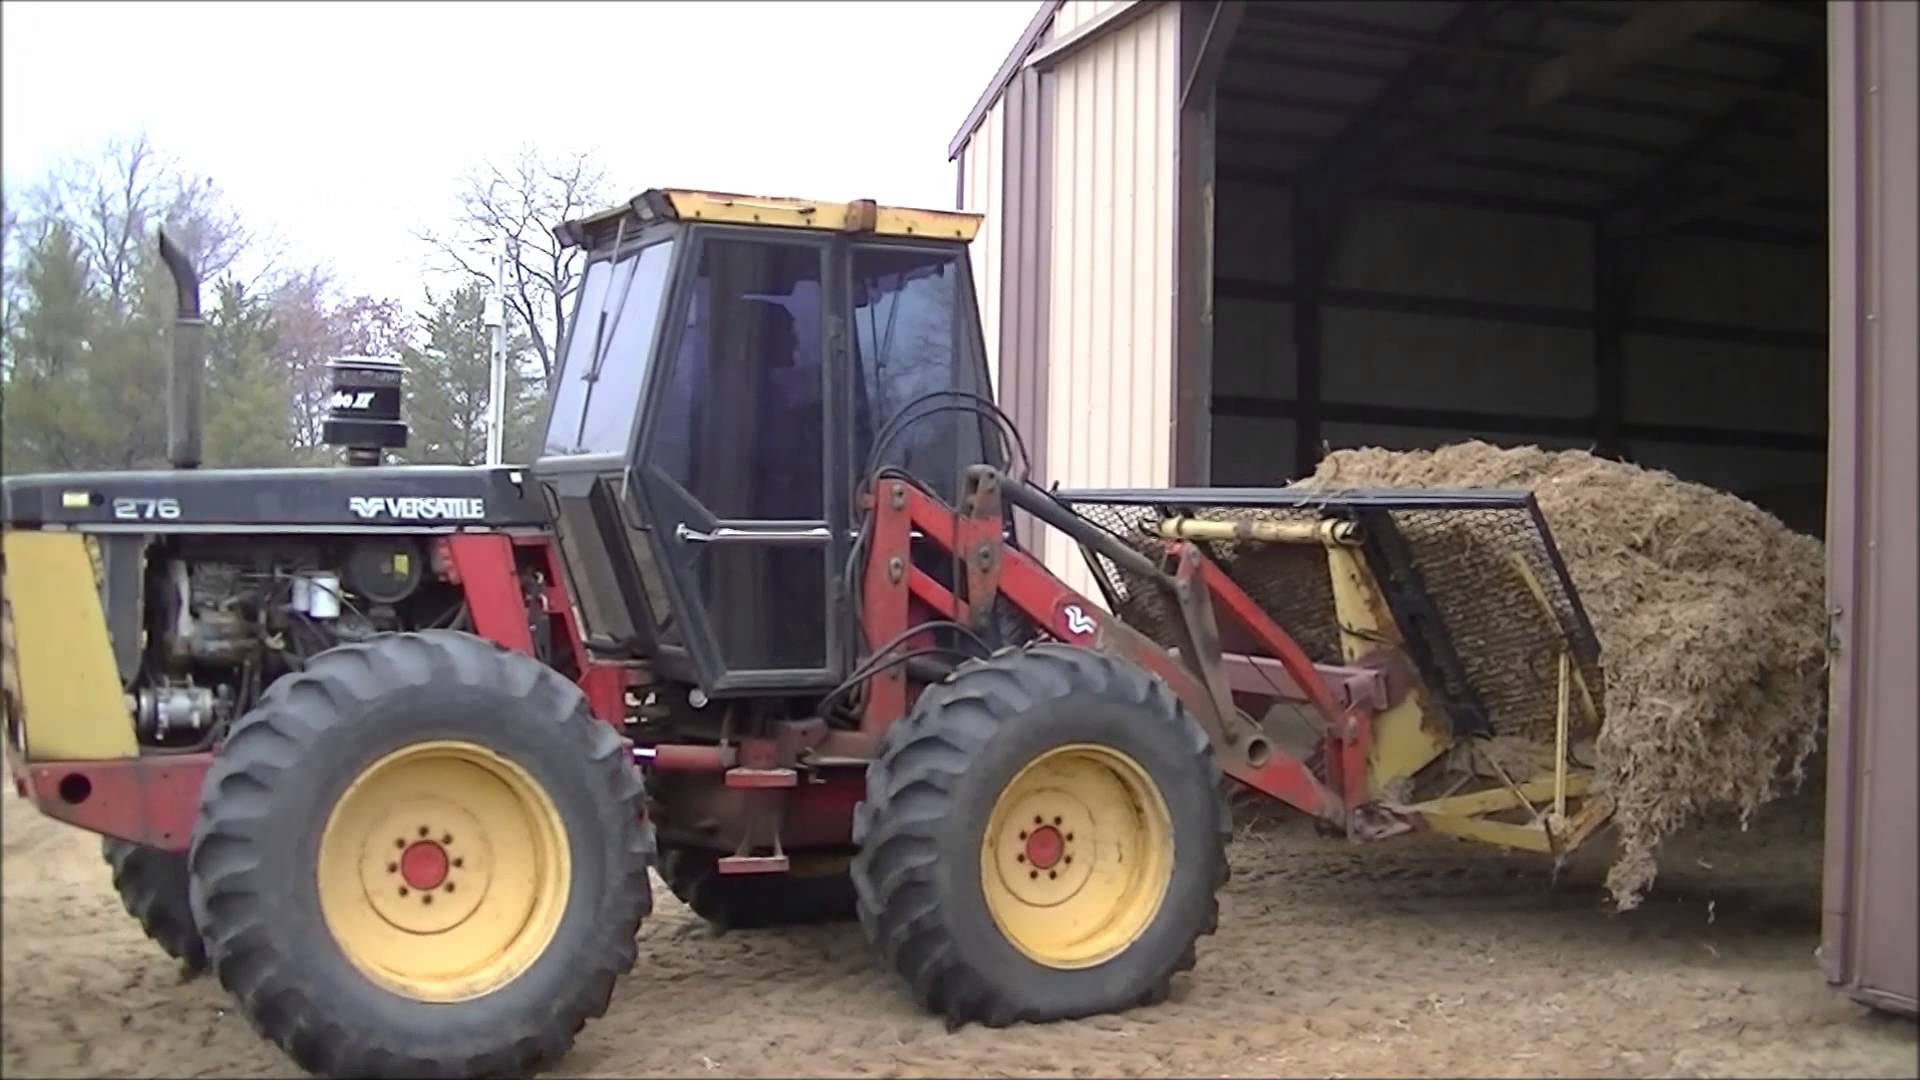 ... fo Dry Moss into the Shed with the Versatile 276 Tractor - YouTube